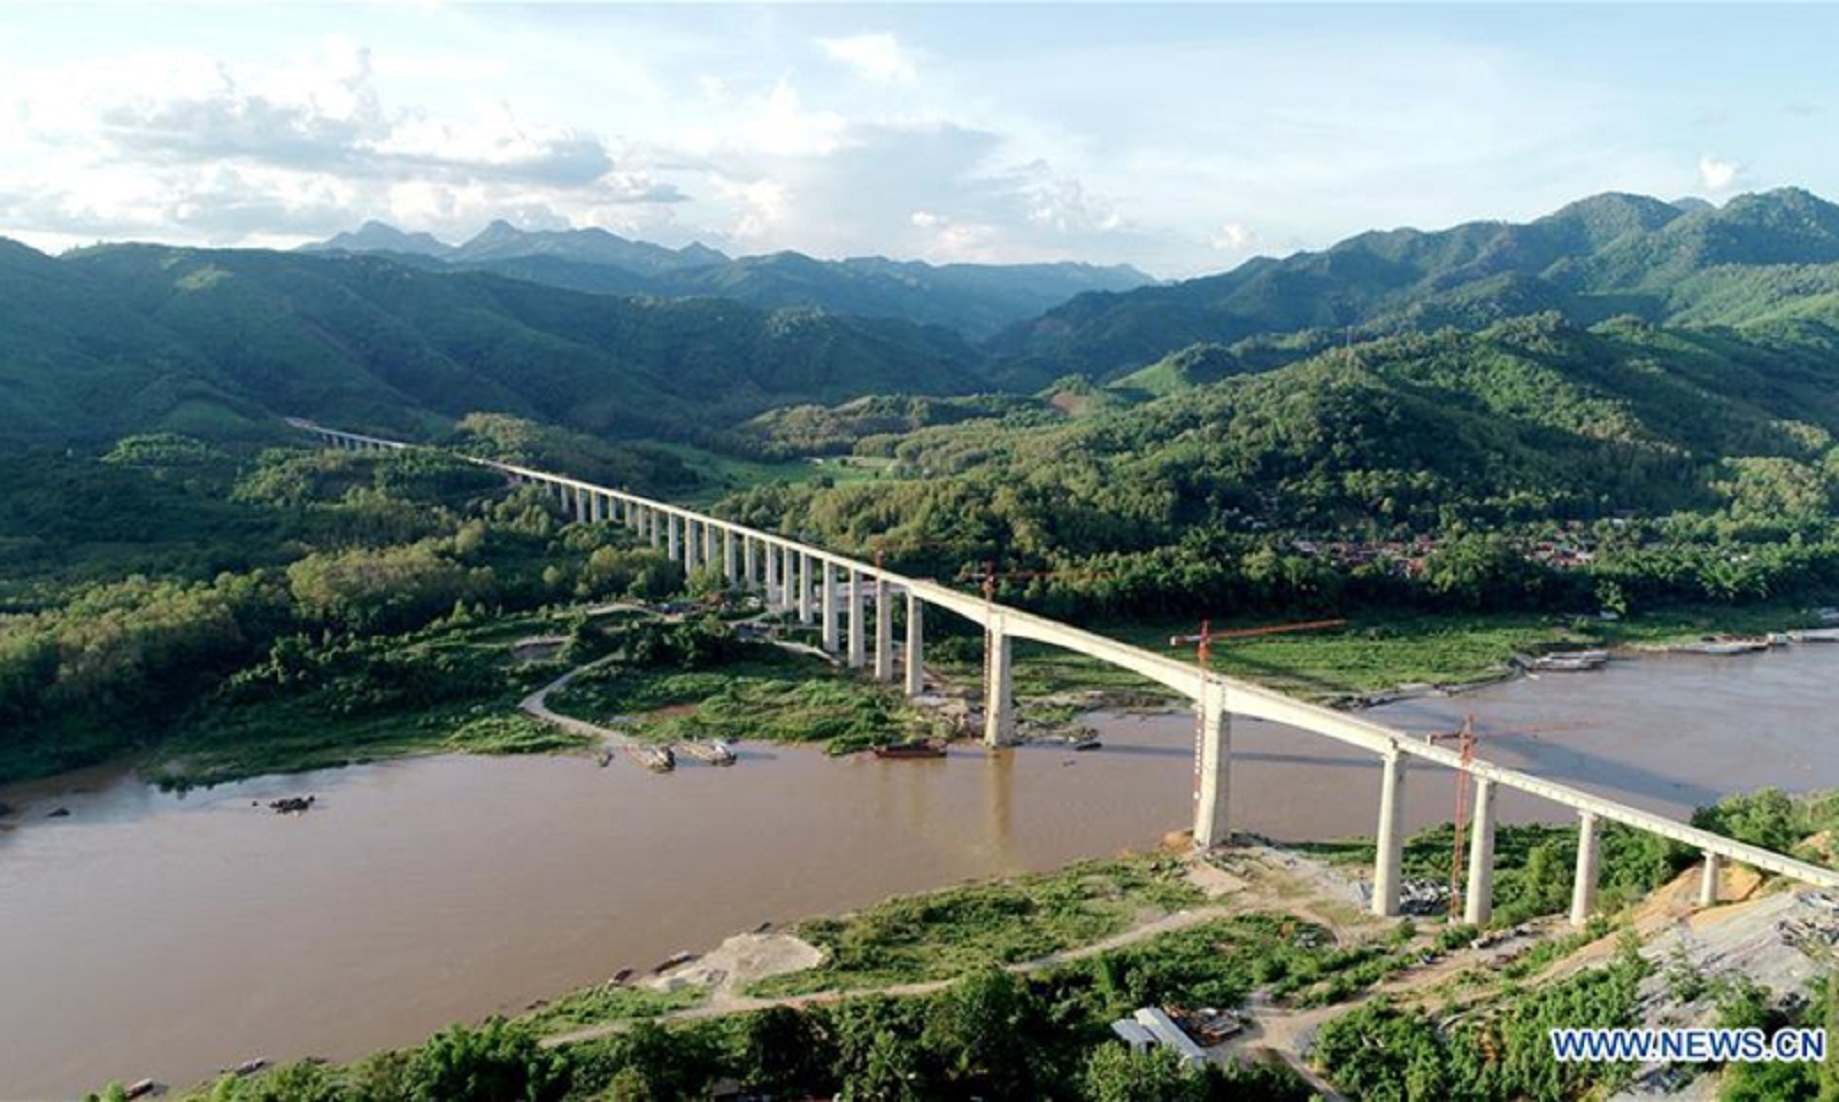 Main Structure Of Longest Bridge Along China-Laos Railway Completed